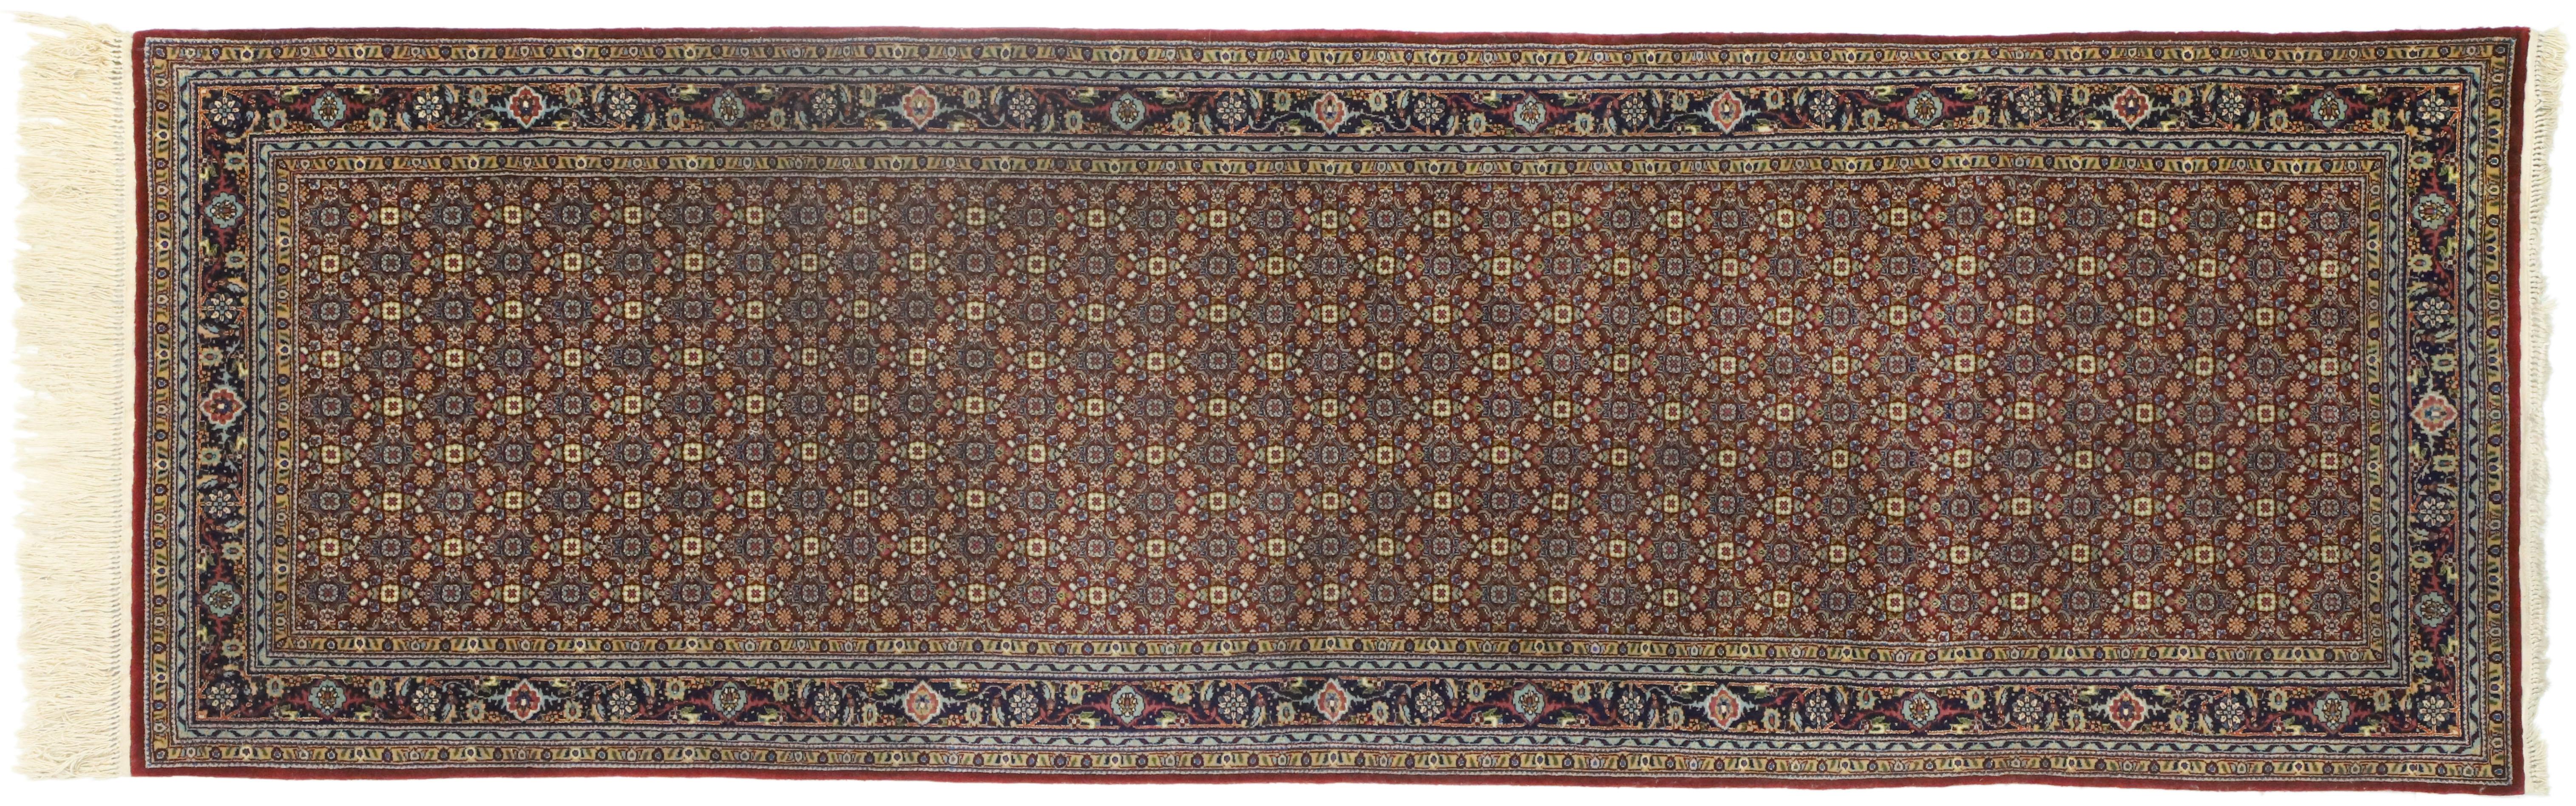 Vintage Persian Style Hallway Runner with Tabriz Design For Sale 4